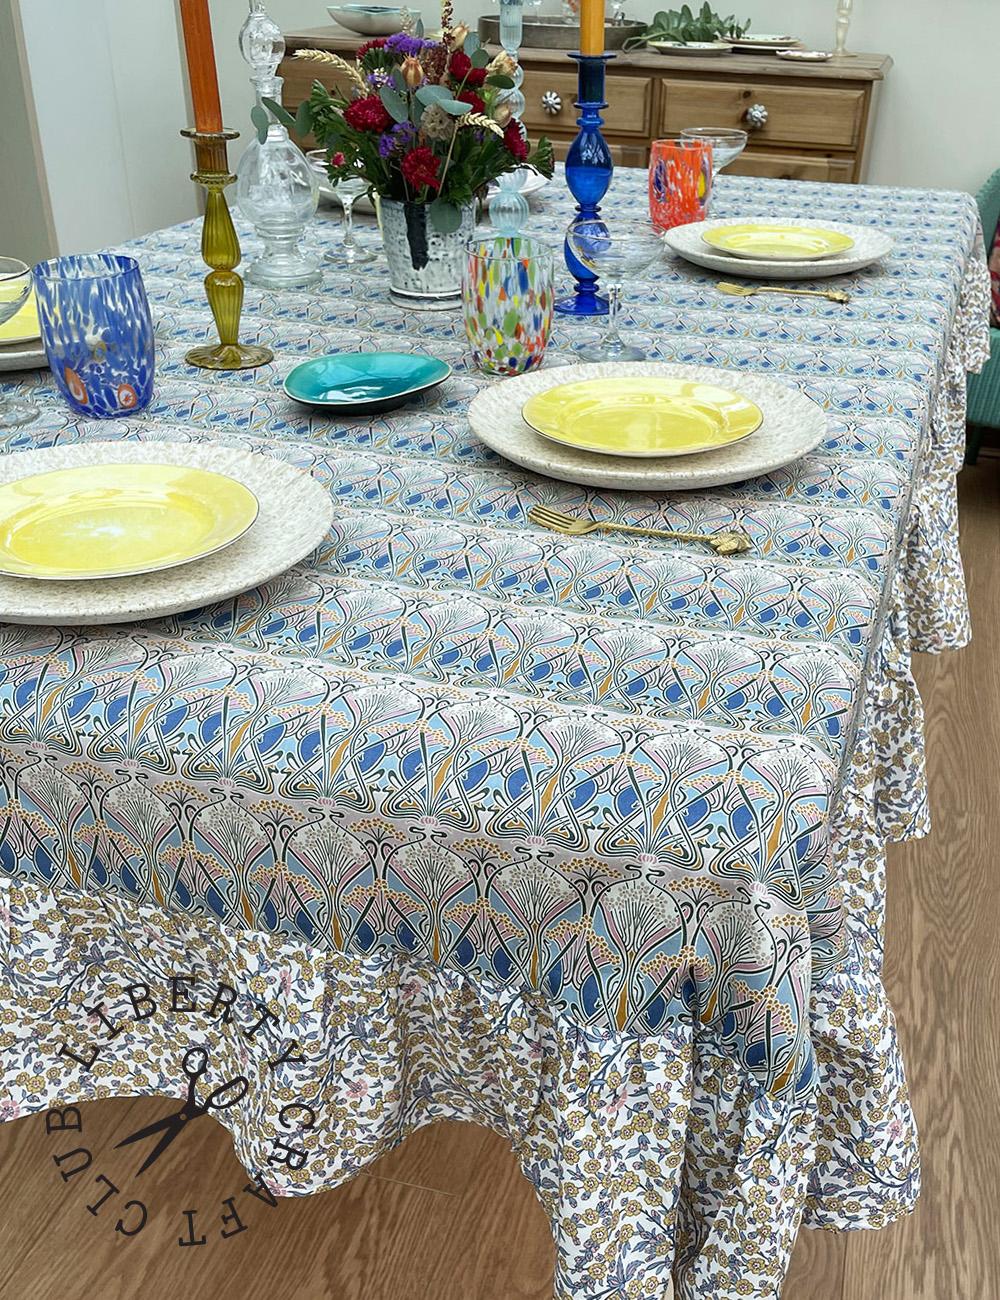 How To Make A Tablecloth With A Ruffle Trim